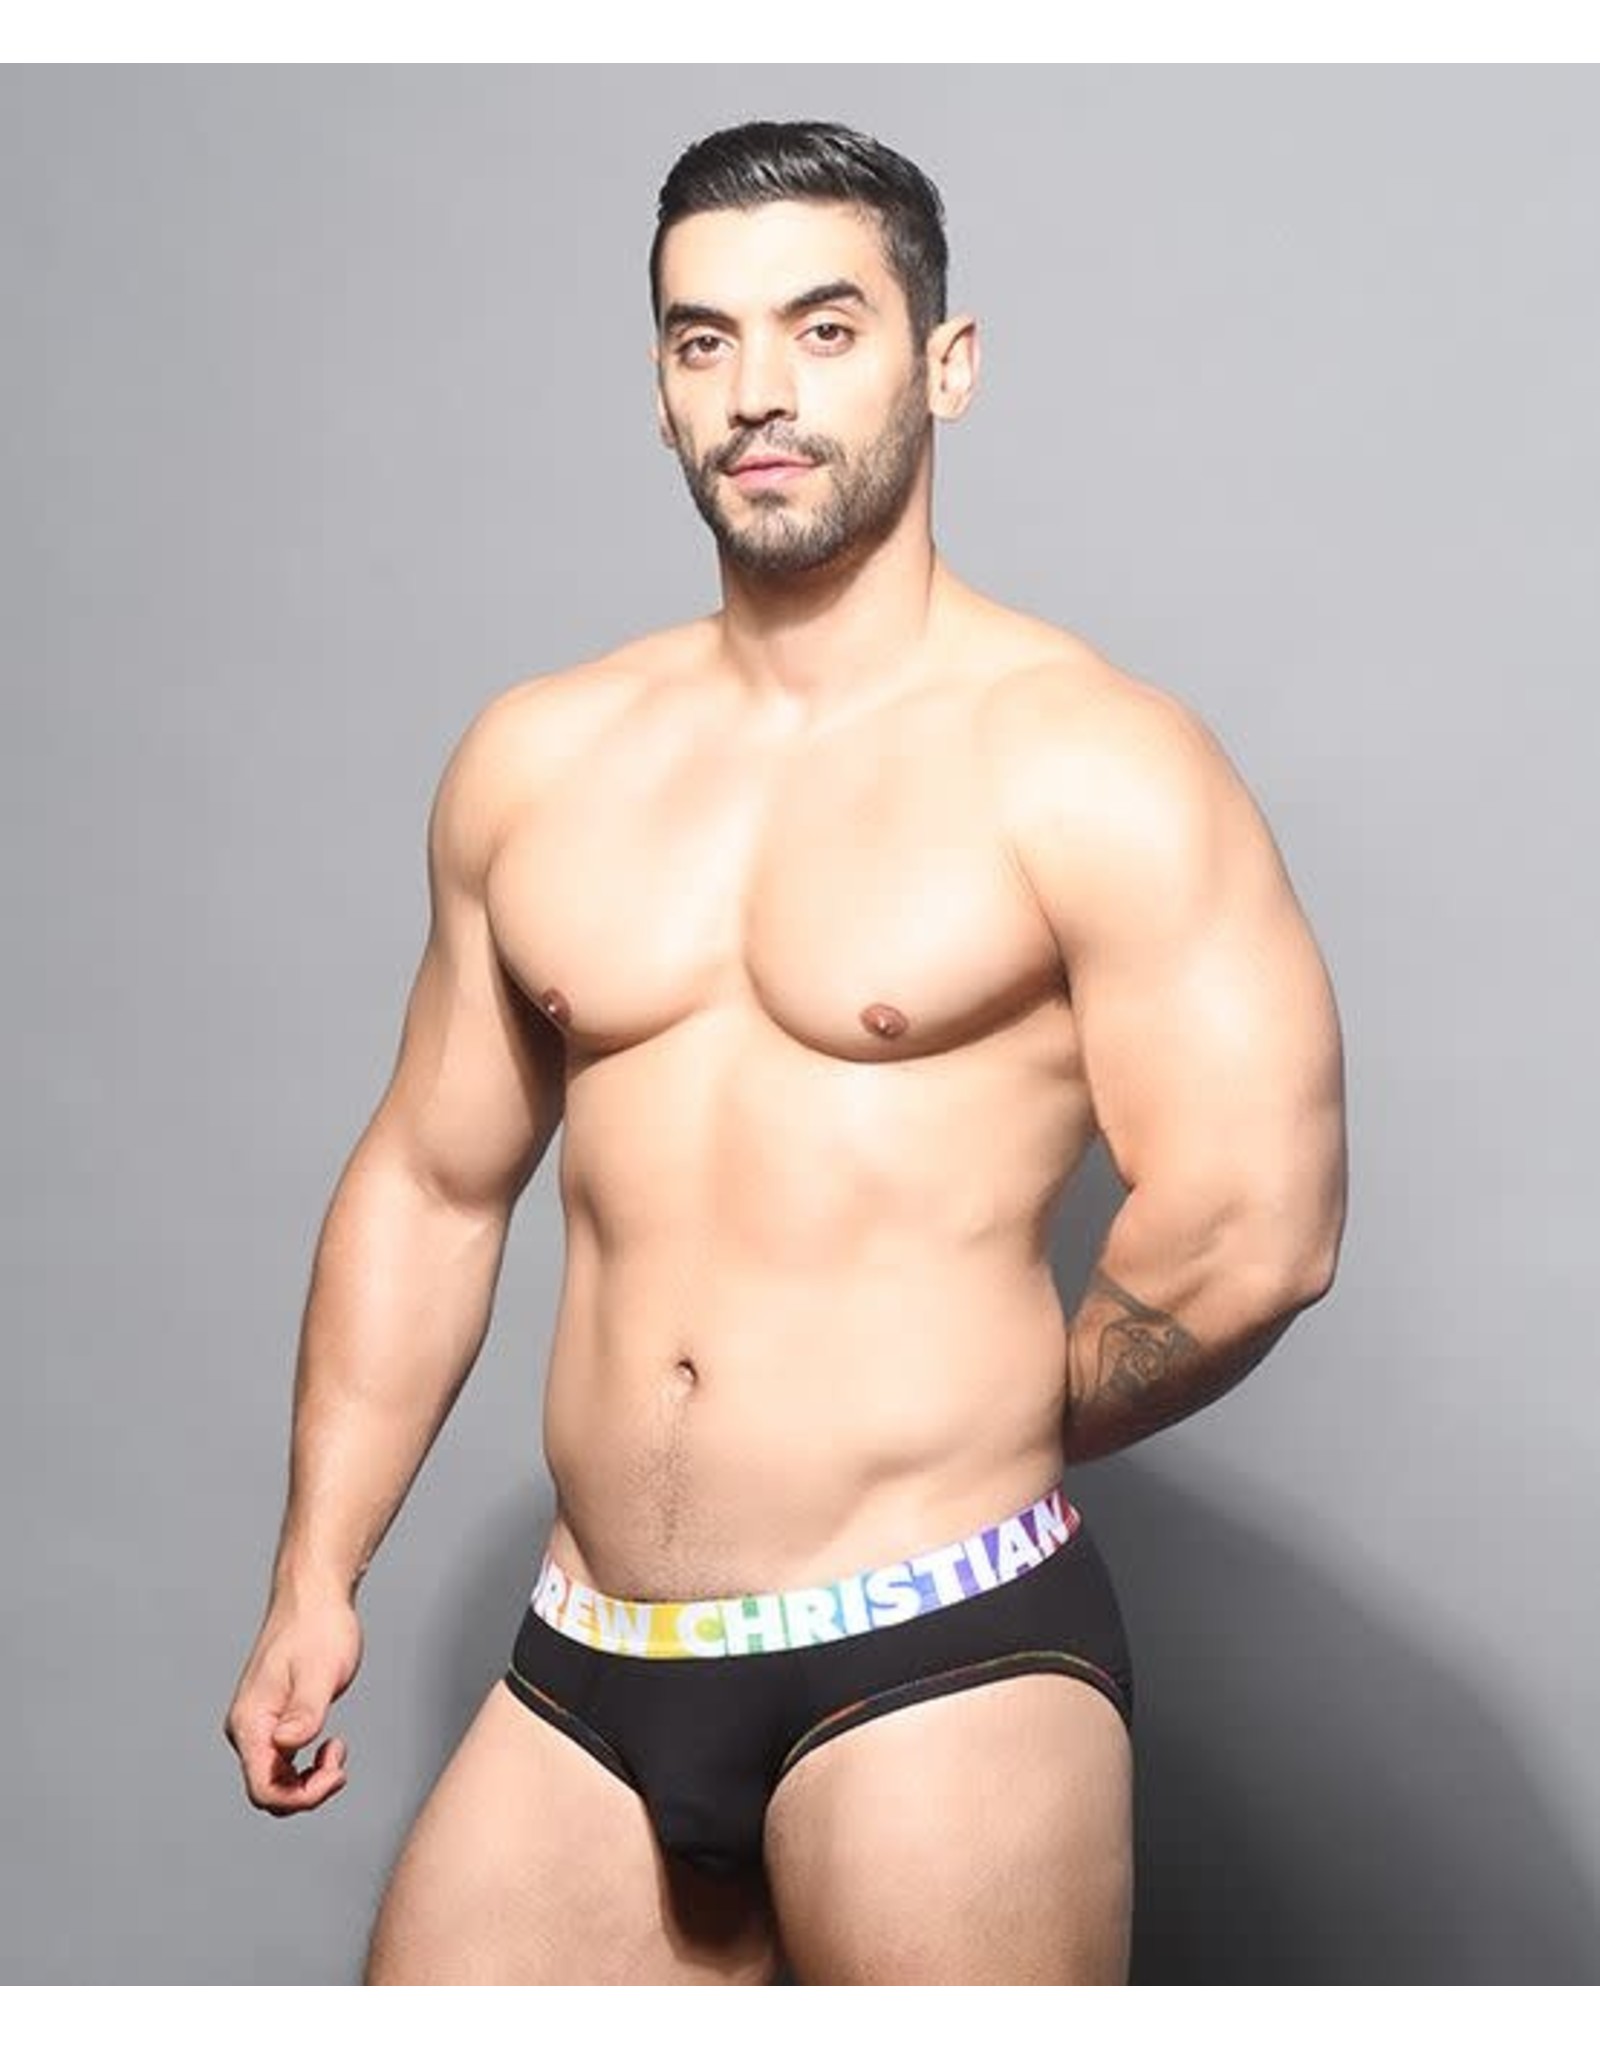 ANDREW CHRISTIAN ANDREW CHRISTIAN ALMOST NAKED COTTON PRIDE BRIEF BLACK